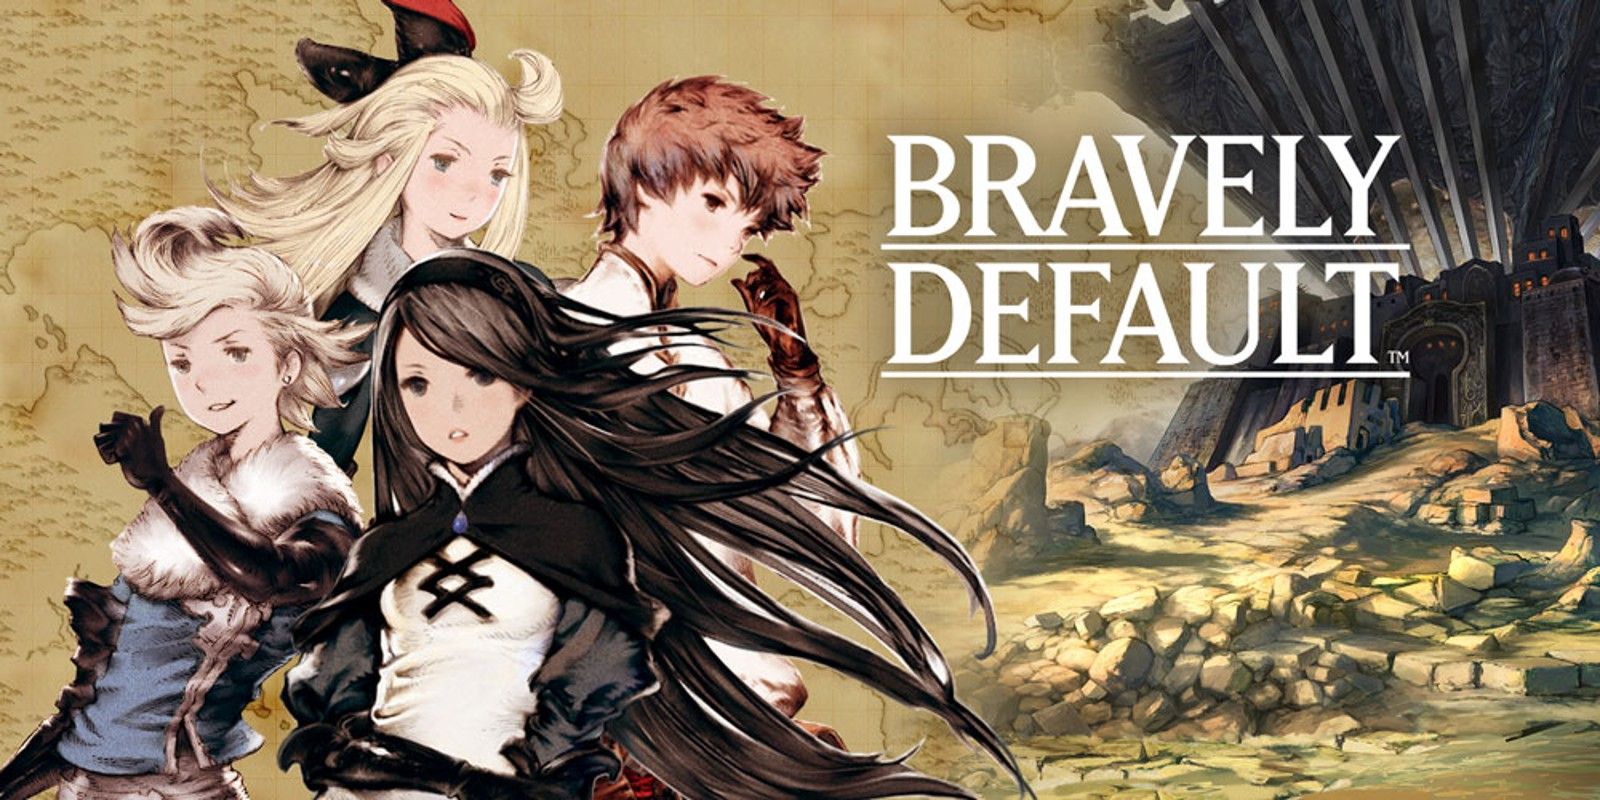 Bravely Default key art featuring the main cast of four characters.